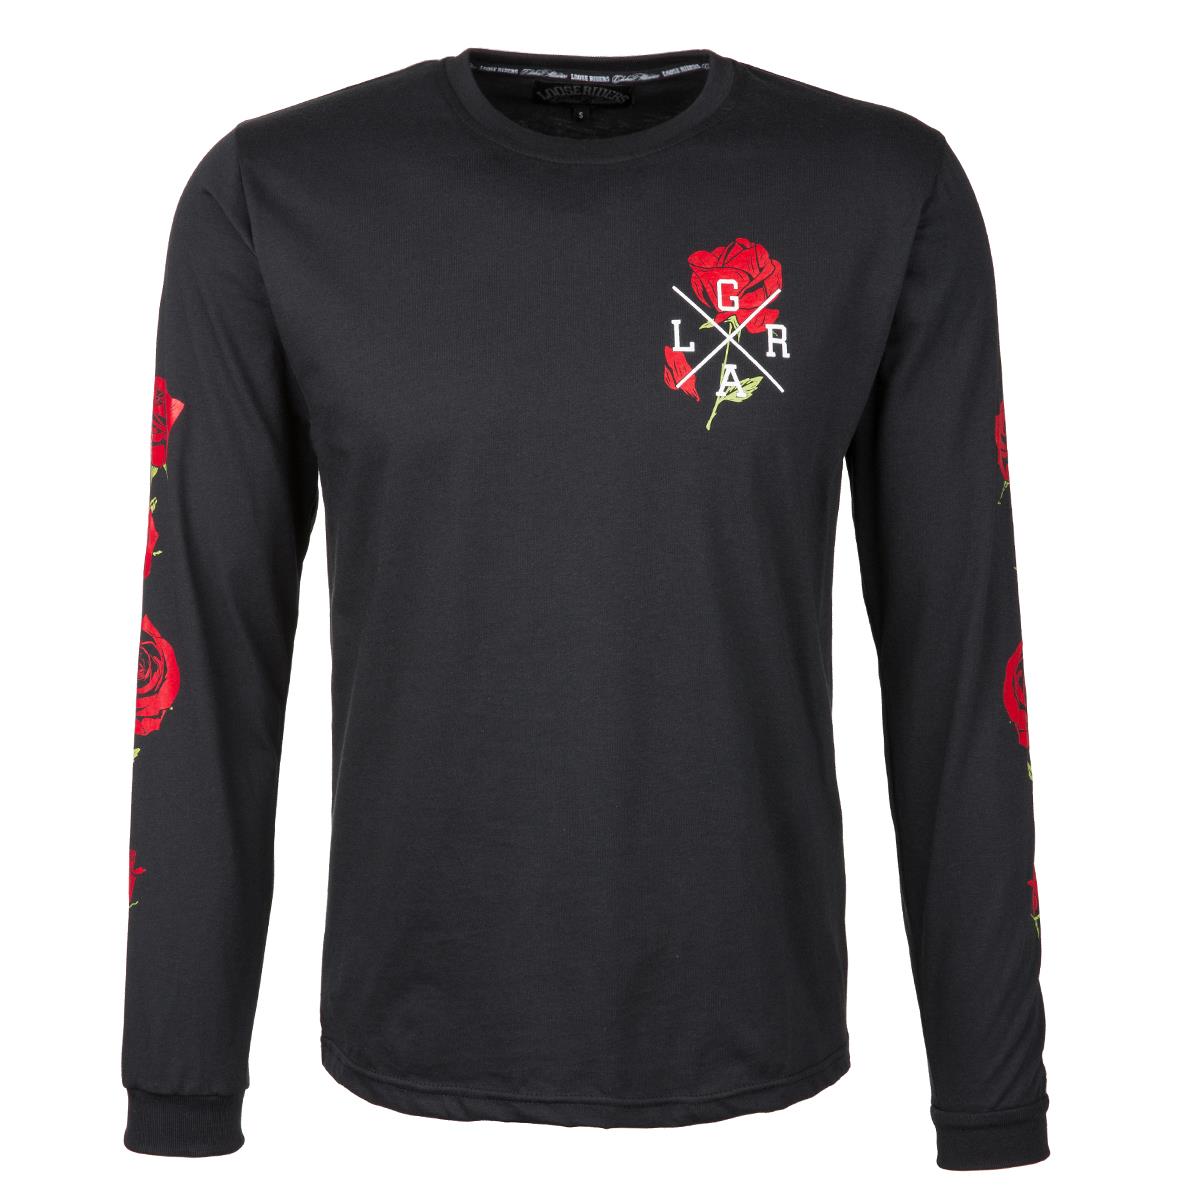 Loose Riders Pull Roses Black/Red